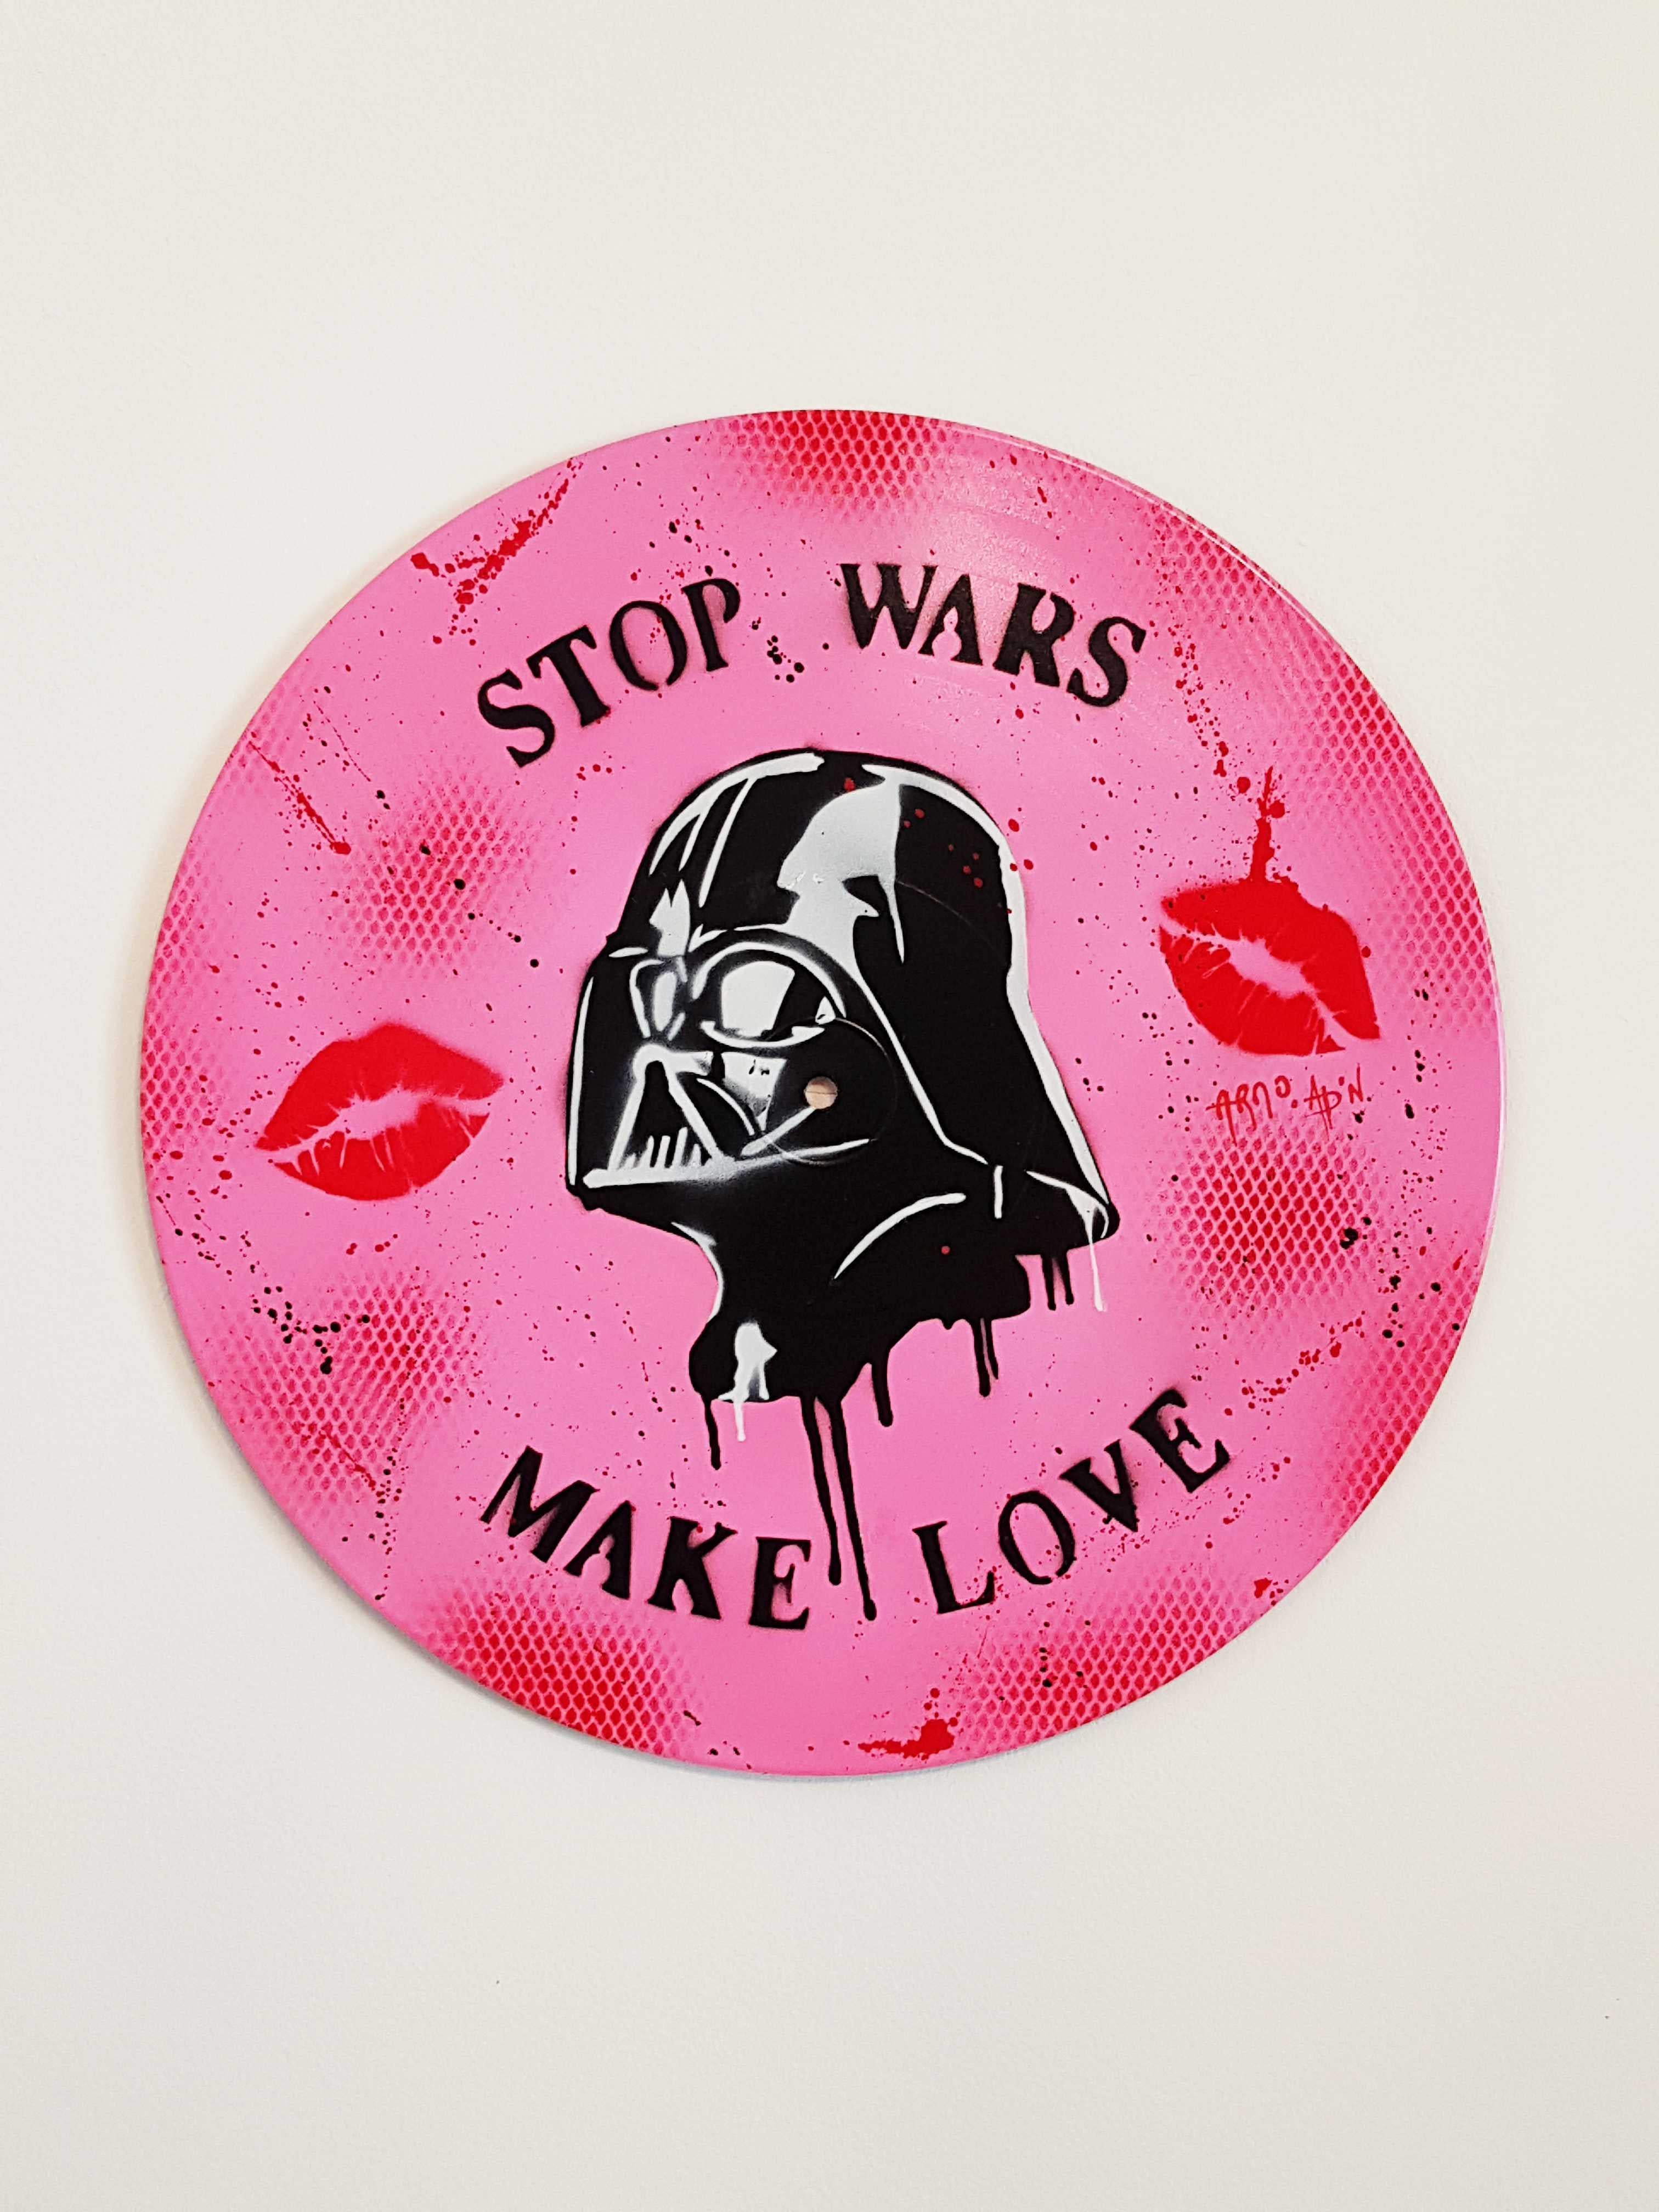 Stop Wars, Make Love - Painting by Arno DNA